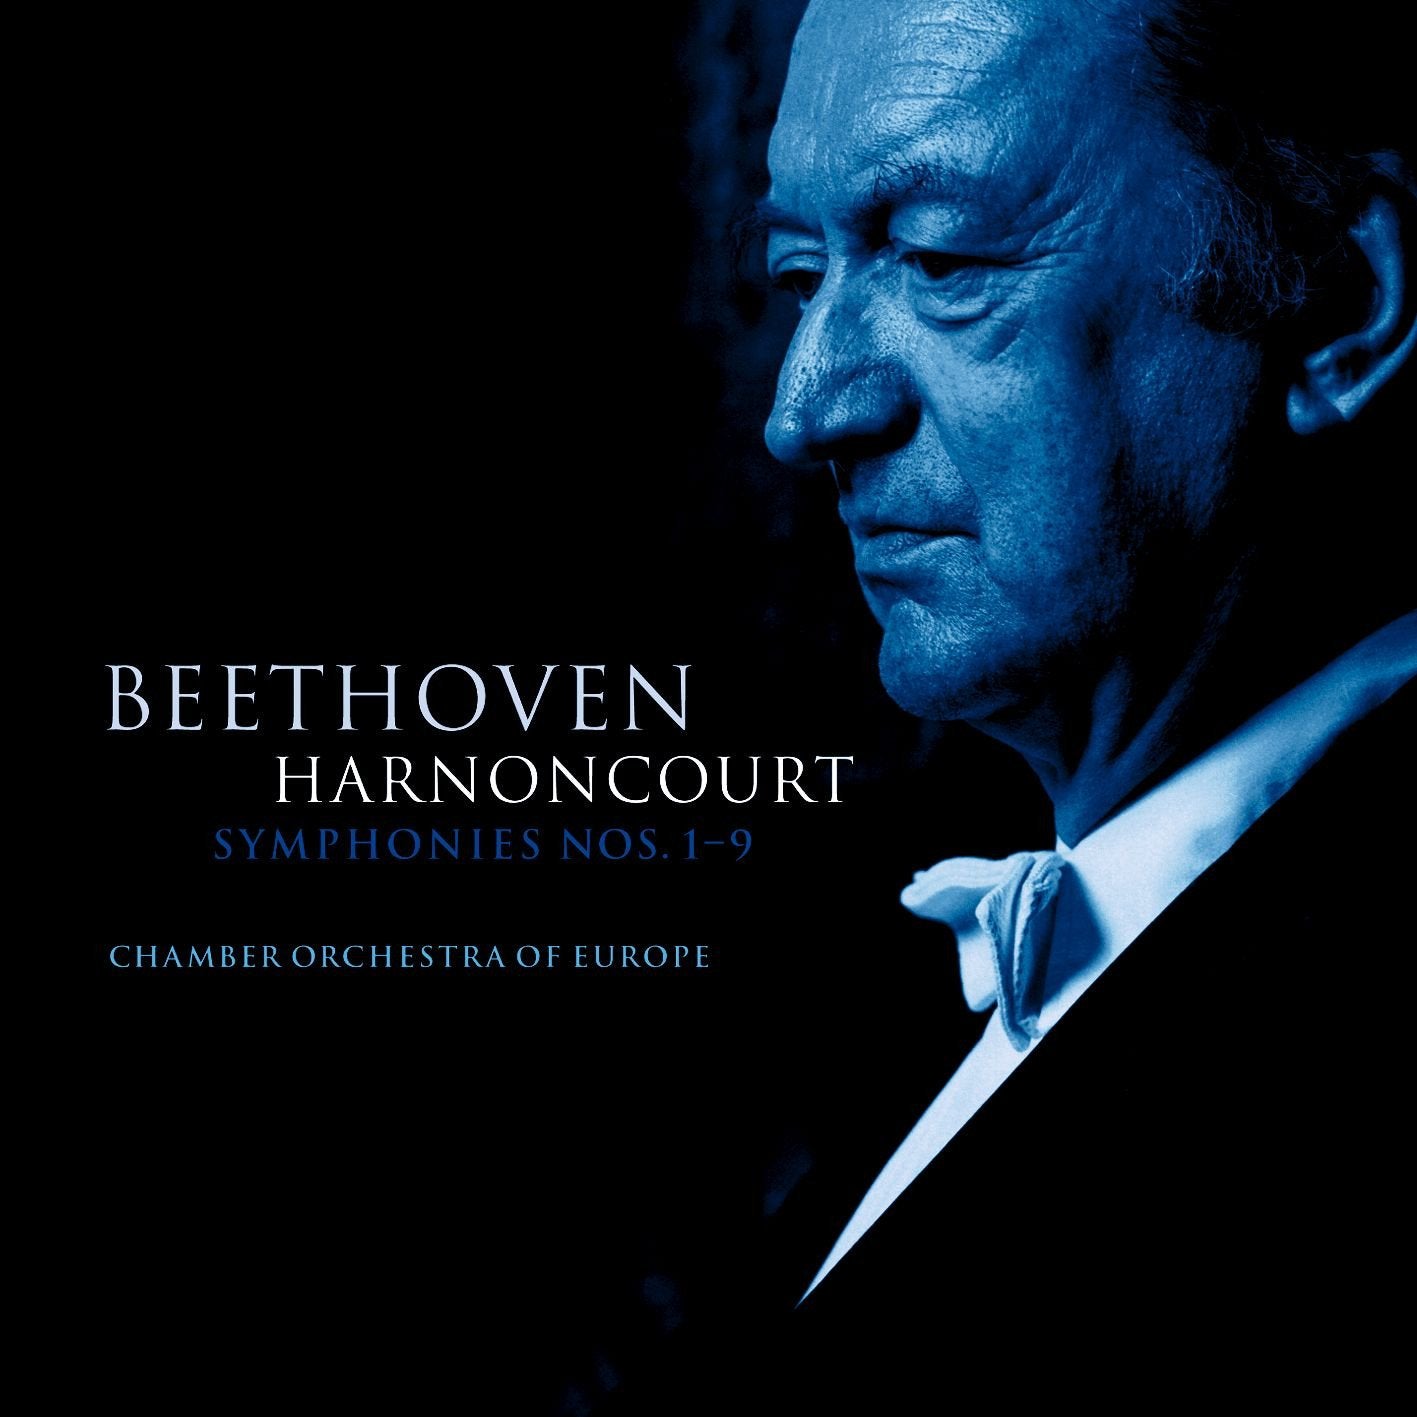 Beethoven: 9 Symphonies - Nikolaus Harnoncourt, Chamber Orchestra of Europe (5 CDs)